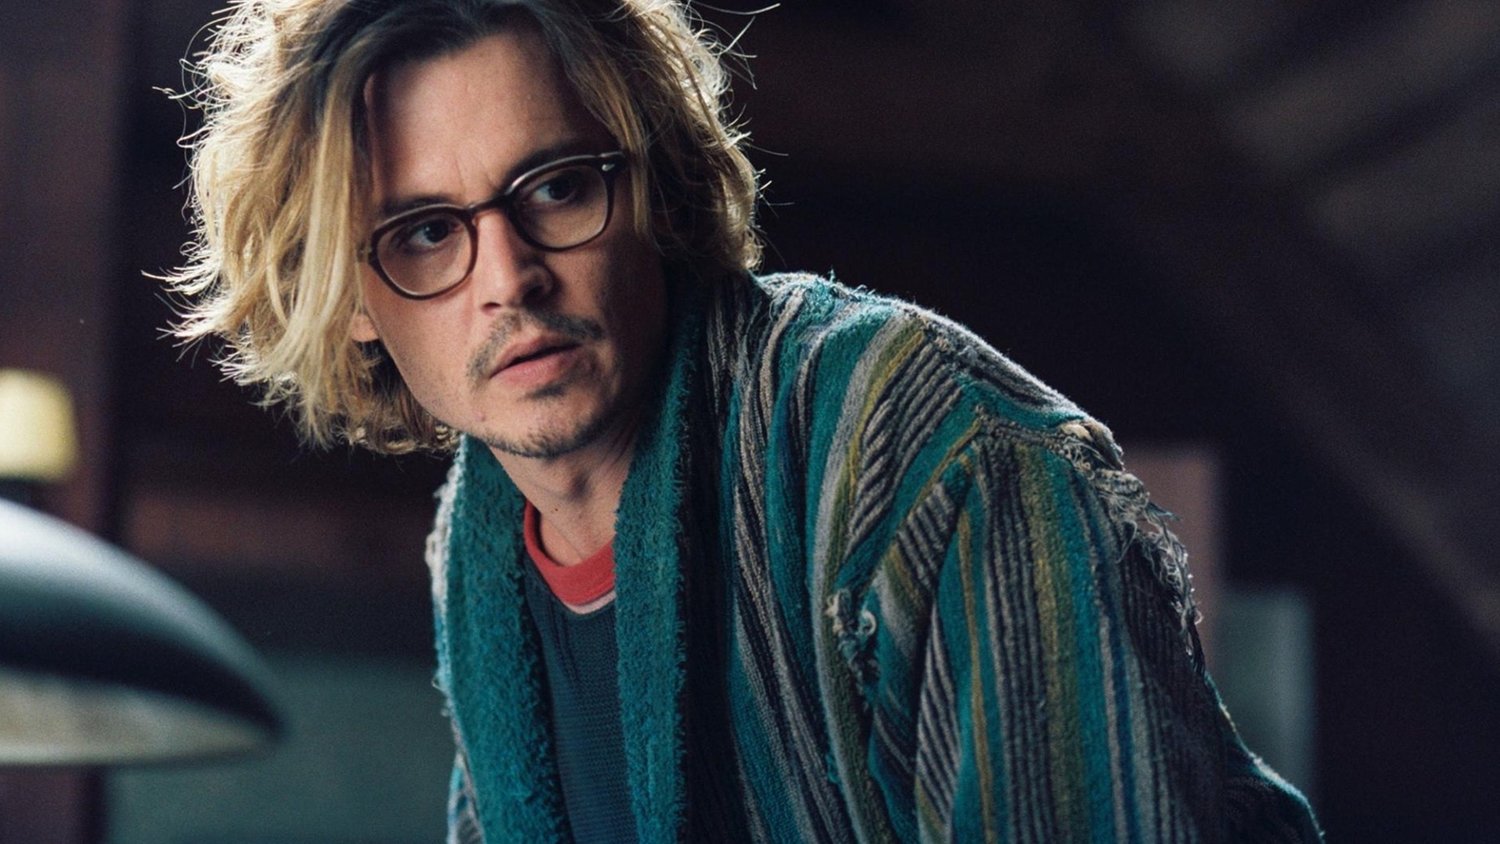 Which film features Johnny Depp as a computer hacker with a split personality?